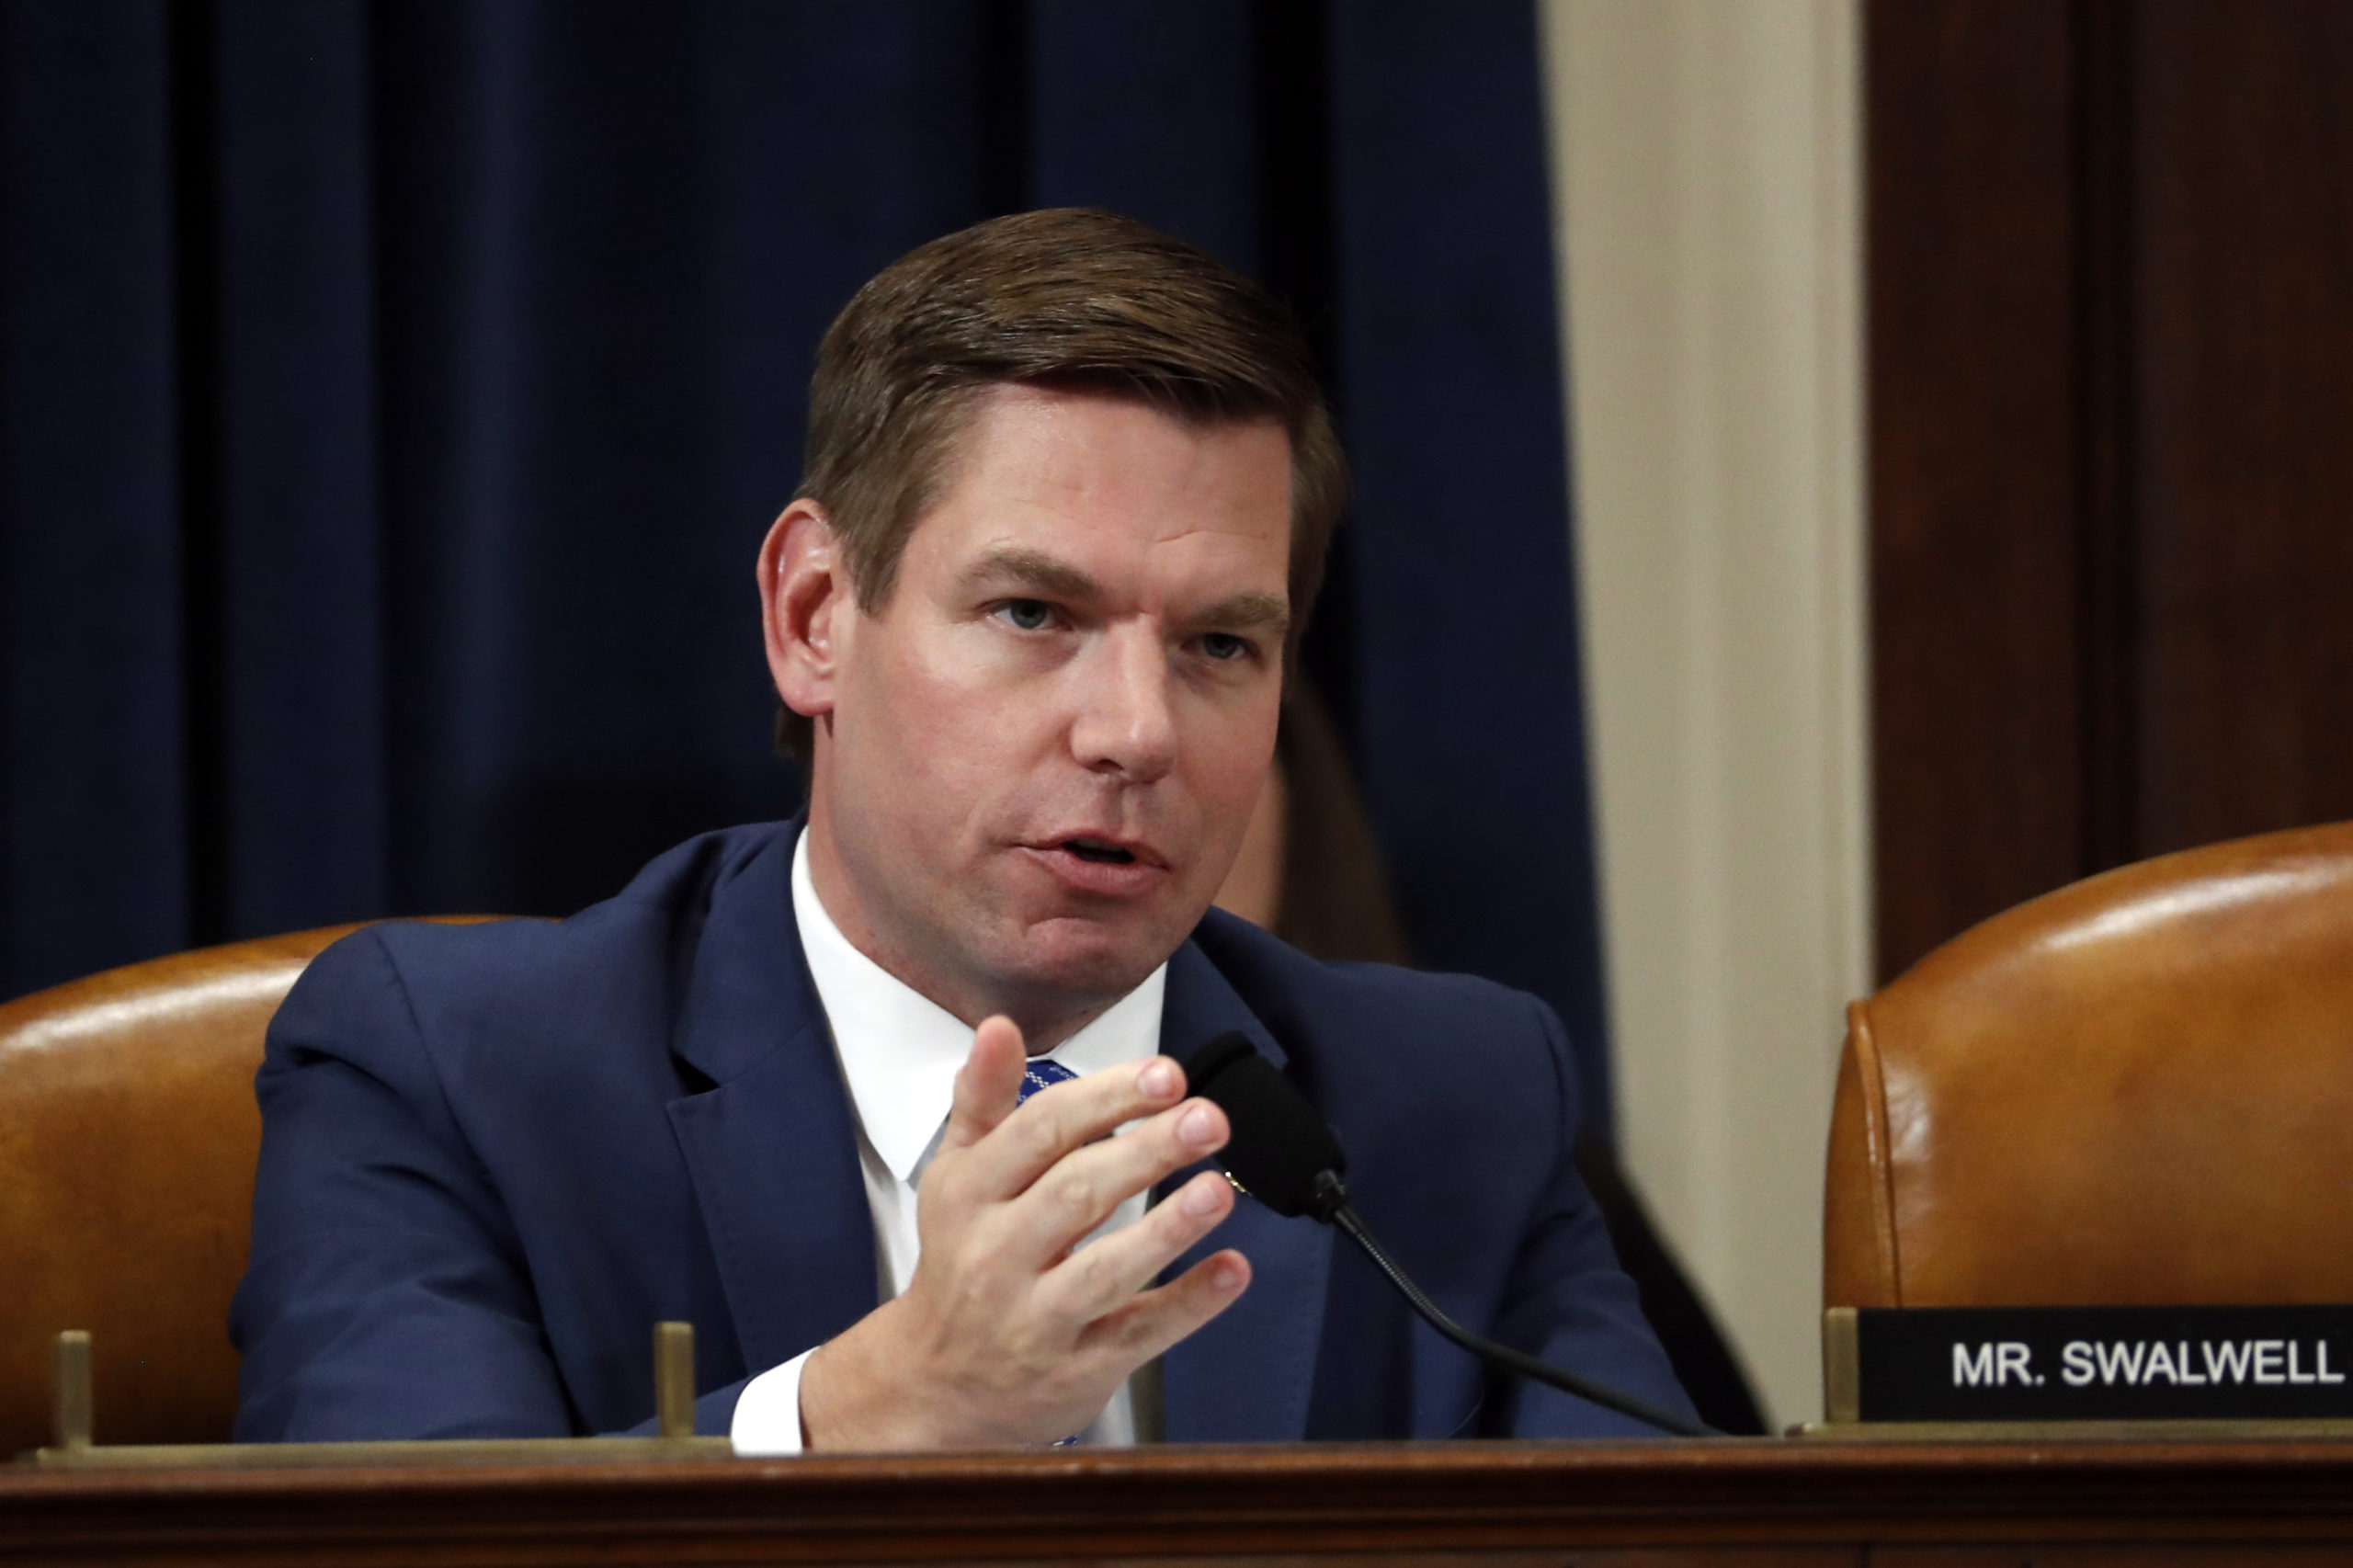 WASHINGTON, DC - NOVEMBER 19: U.S. Rep. Eric Swalwell (D-CA) questions Ambassador Kurt Volker, former special envoy to Ukraine, and Tim Morrison, a former official at the National Security Council, as they testify before the House Intelligence Committee on Capitol Hill November 19, 2019 in Washington, DC. The committee heard testimony during the third day of open hearings in the impeachment inquiry against U.S. President Donald Trump, whom House Democrats say held back U.S. military aid for Ukraine while demanding it investigate his political rivals. (Photo by Jacquelyn Martin - Pool/Getty Images)